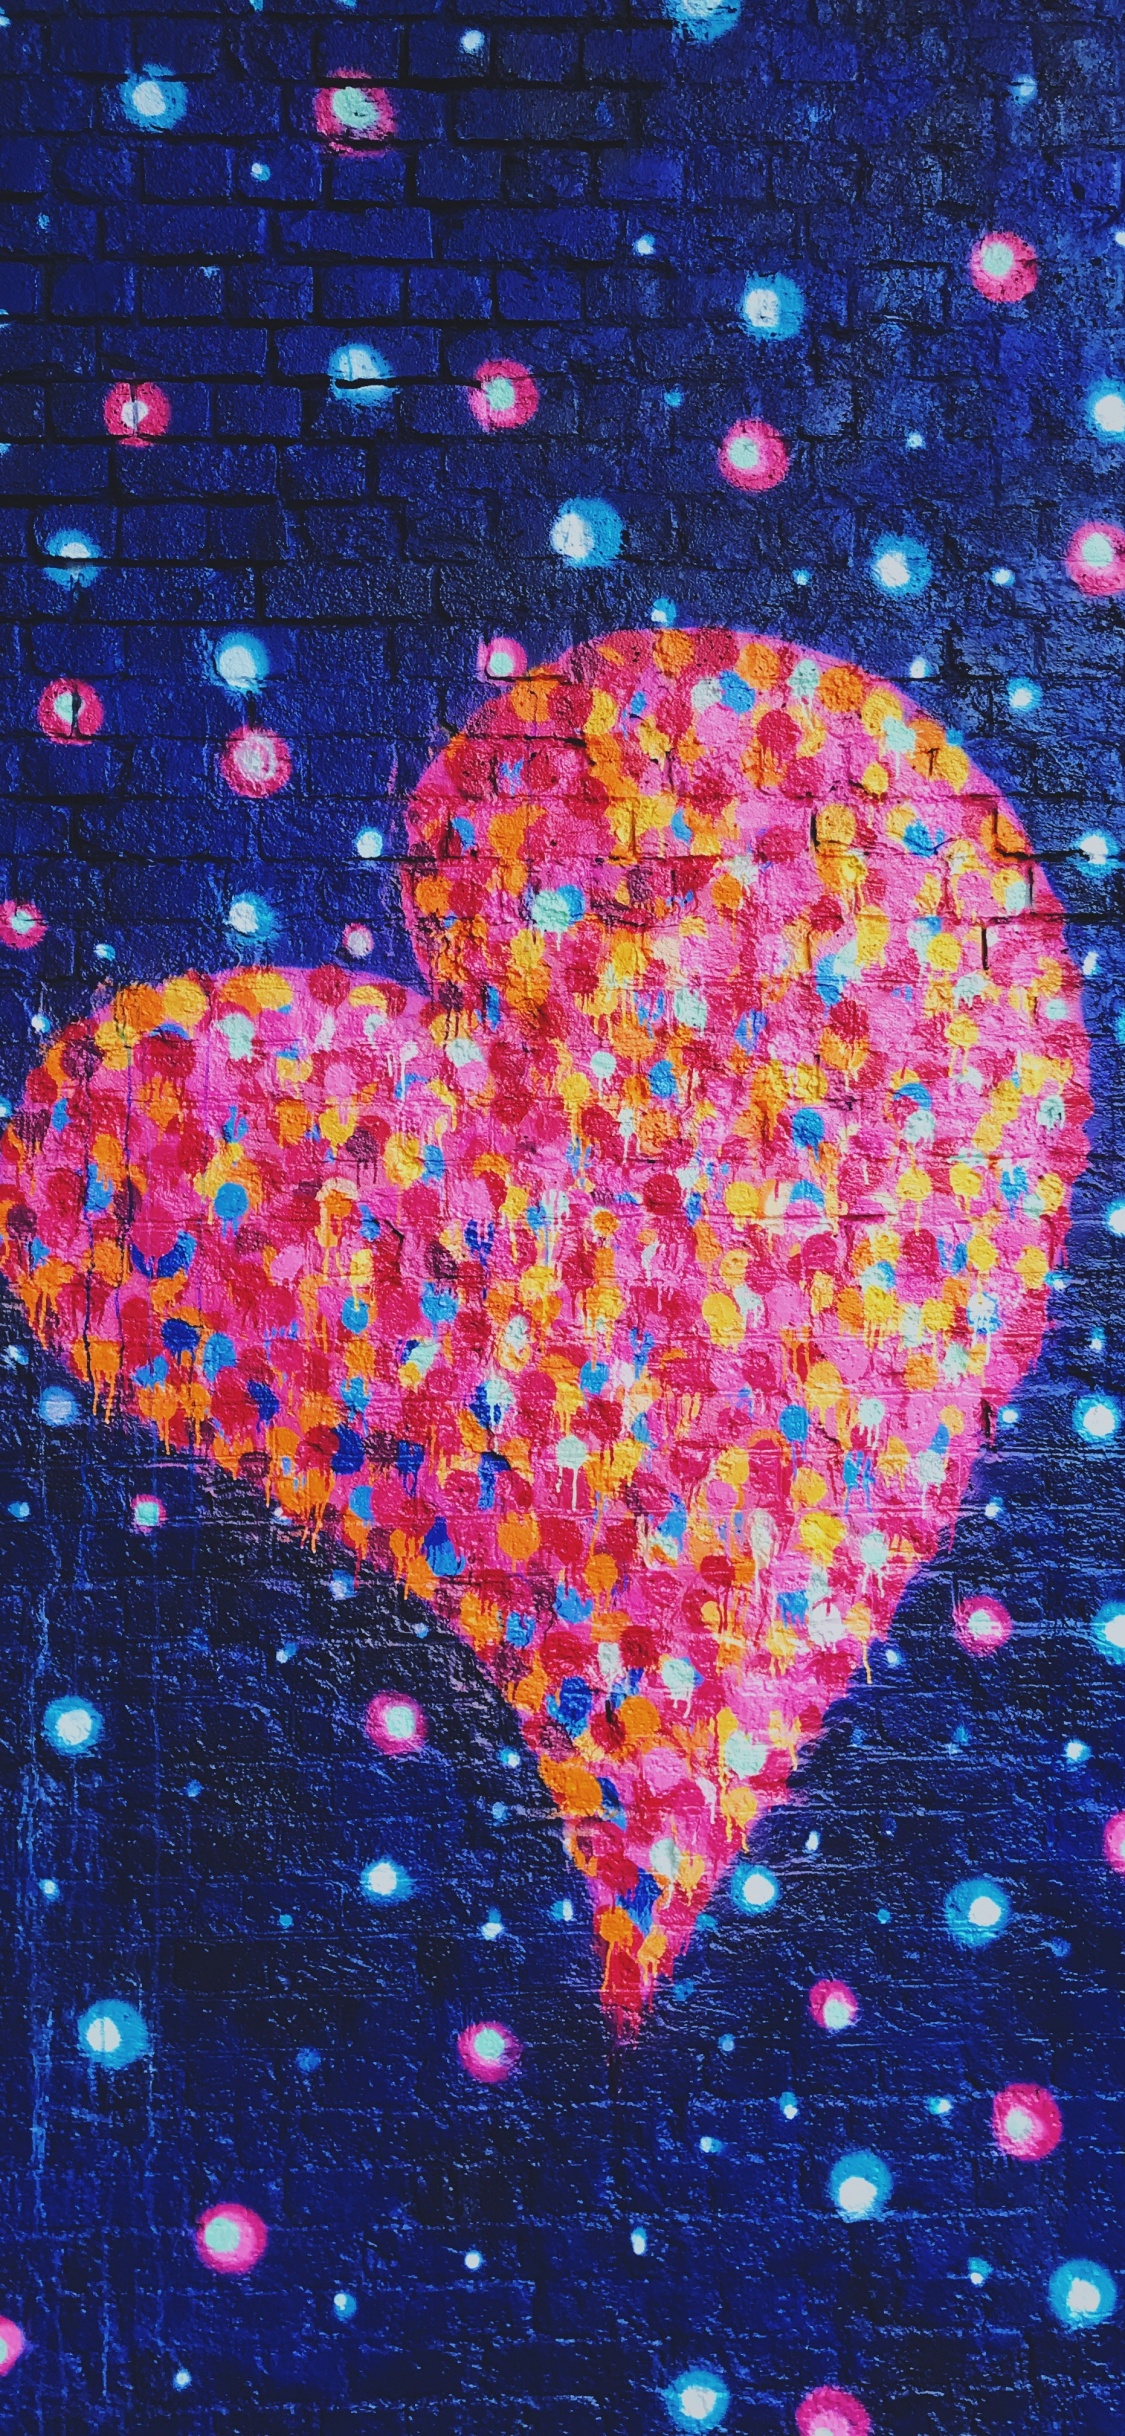 Red Heart With Blue and Pink Hearts Illustration. Wallpaper in 1125x2436 Resolution